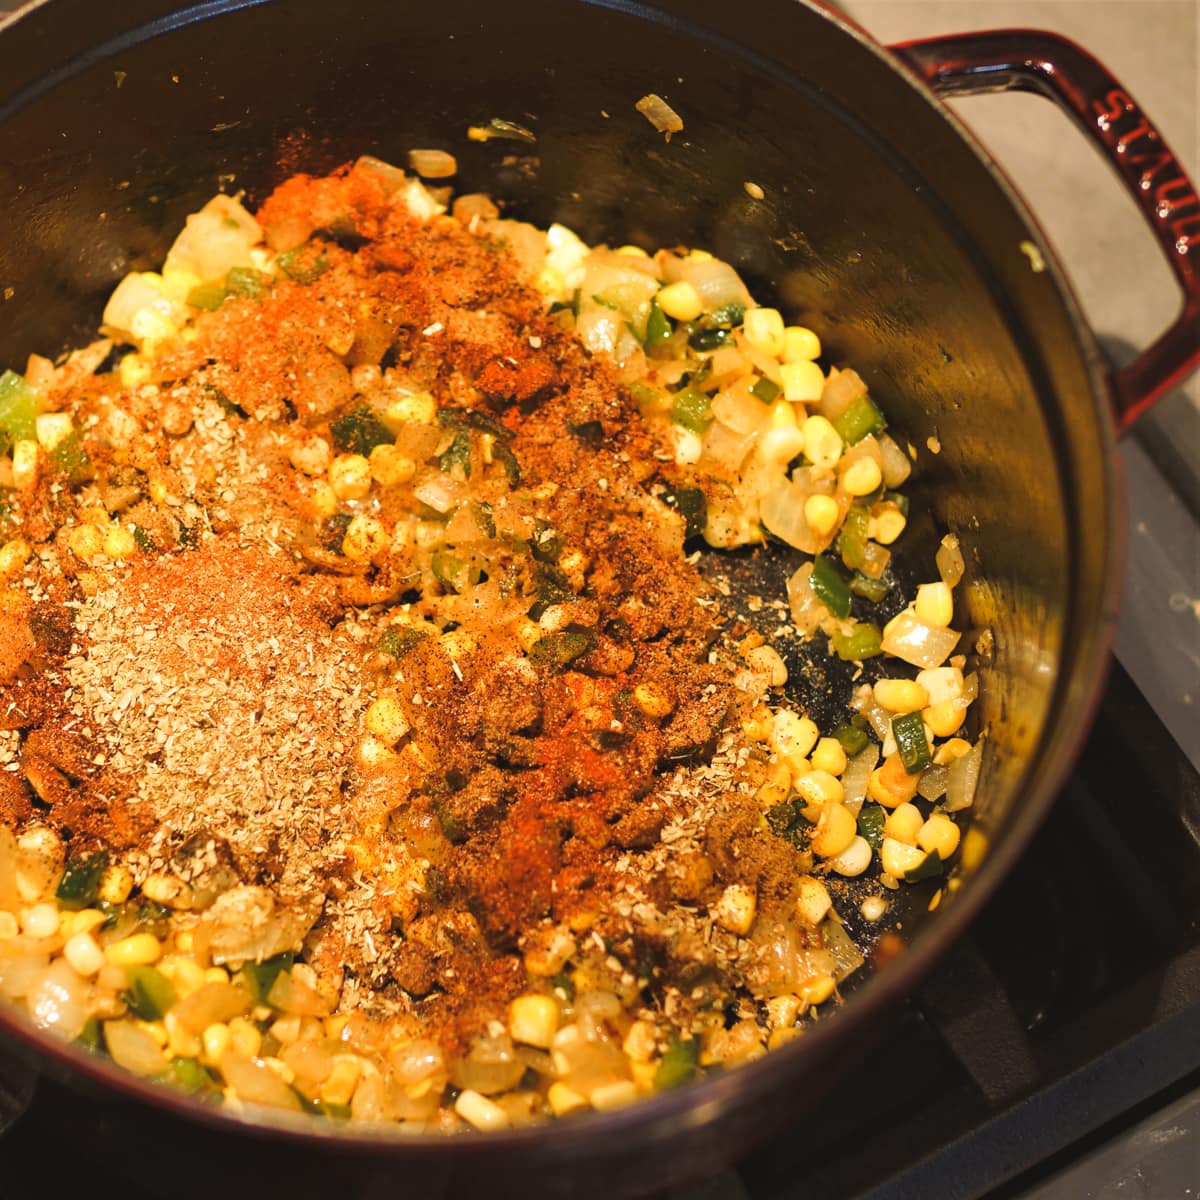 Corn and seasoning added to a Dutch oven of chicken chili.